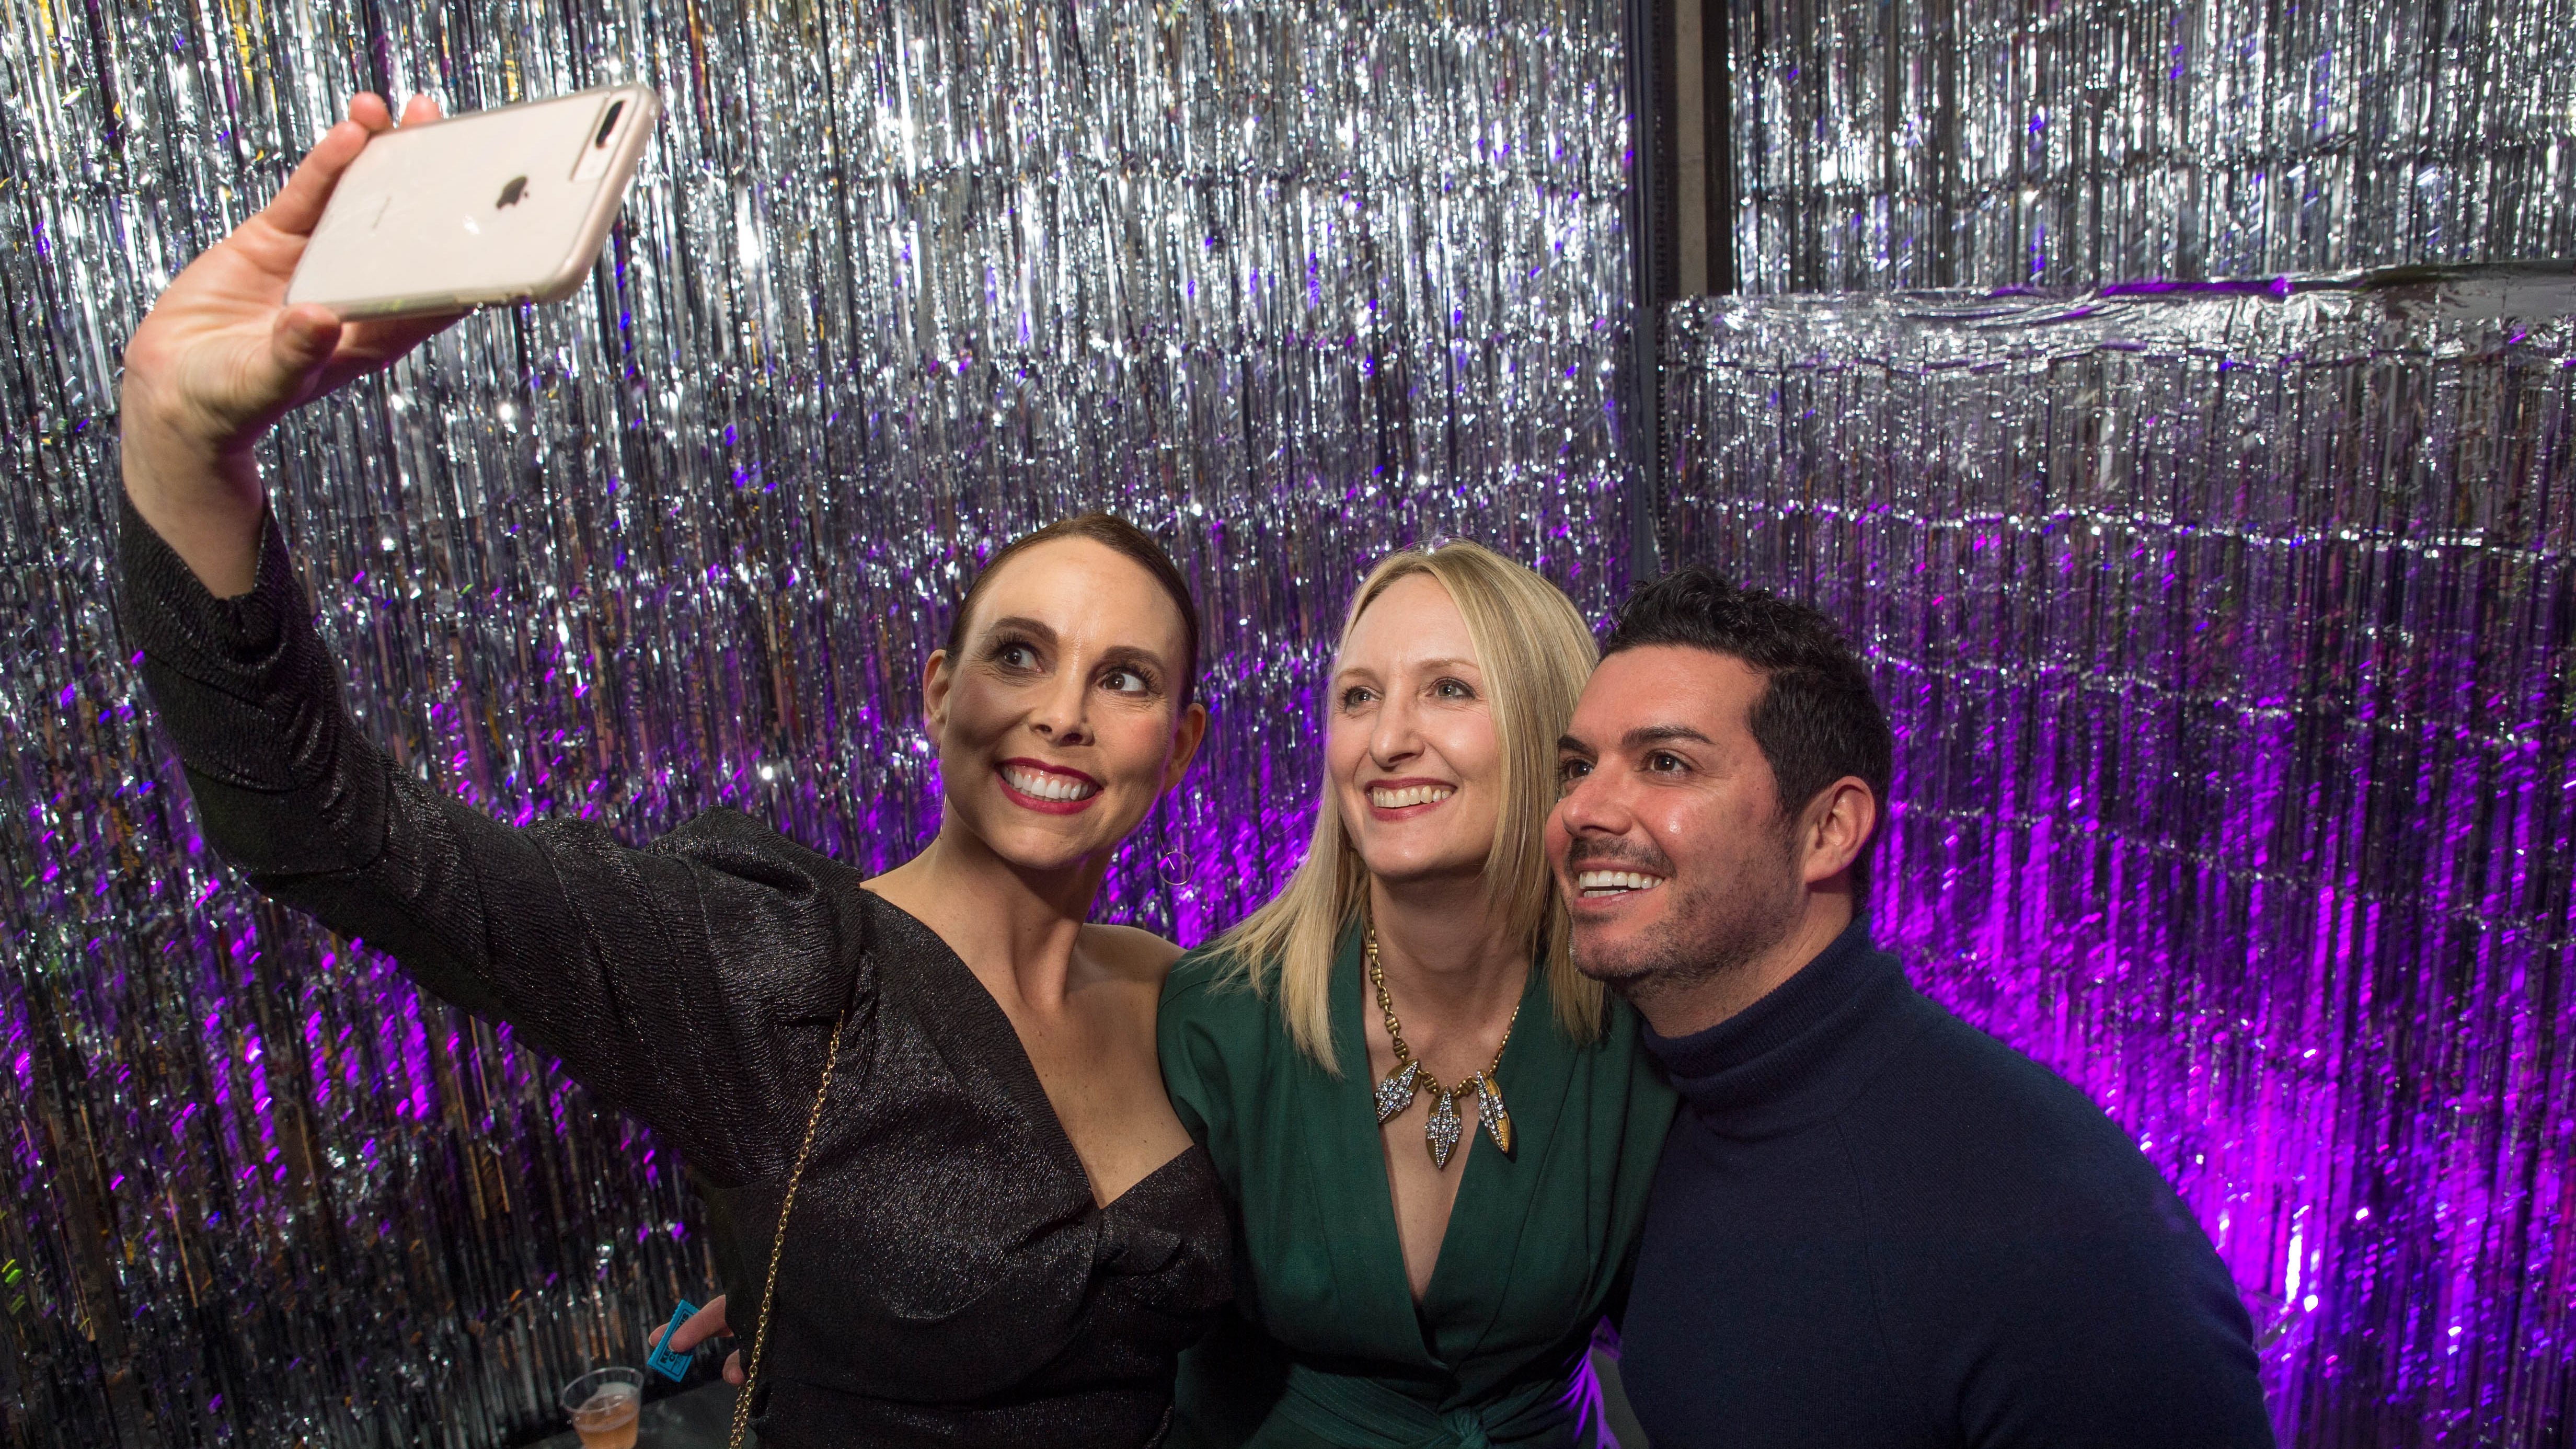 Two women and a man take a selfie against a shimmery silver background with purple lighting.